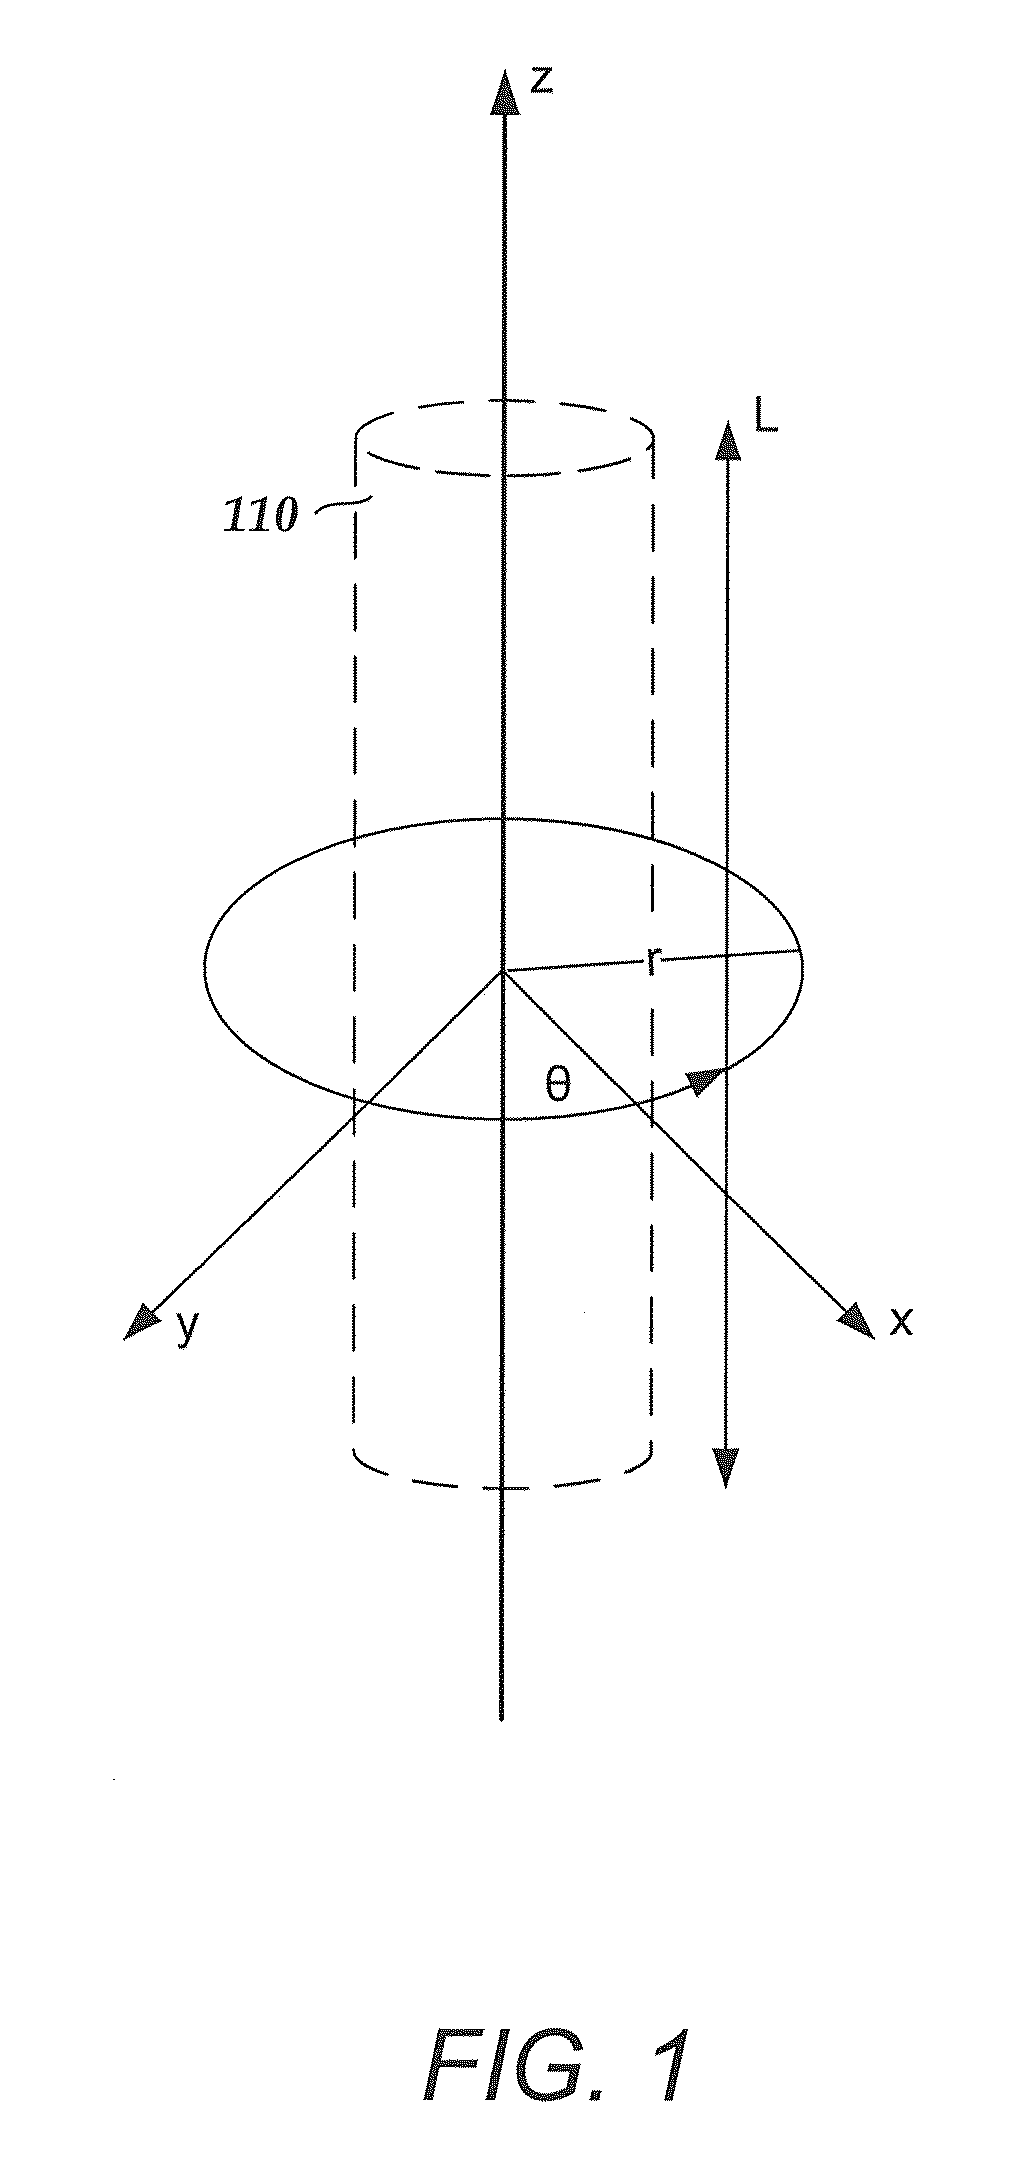 Helical radial spacing of contacts on a cylindrical lead